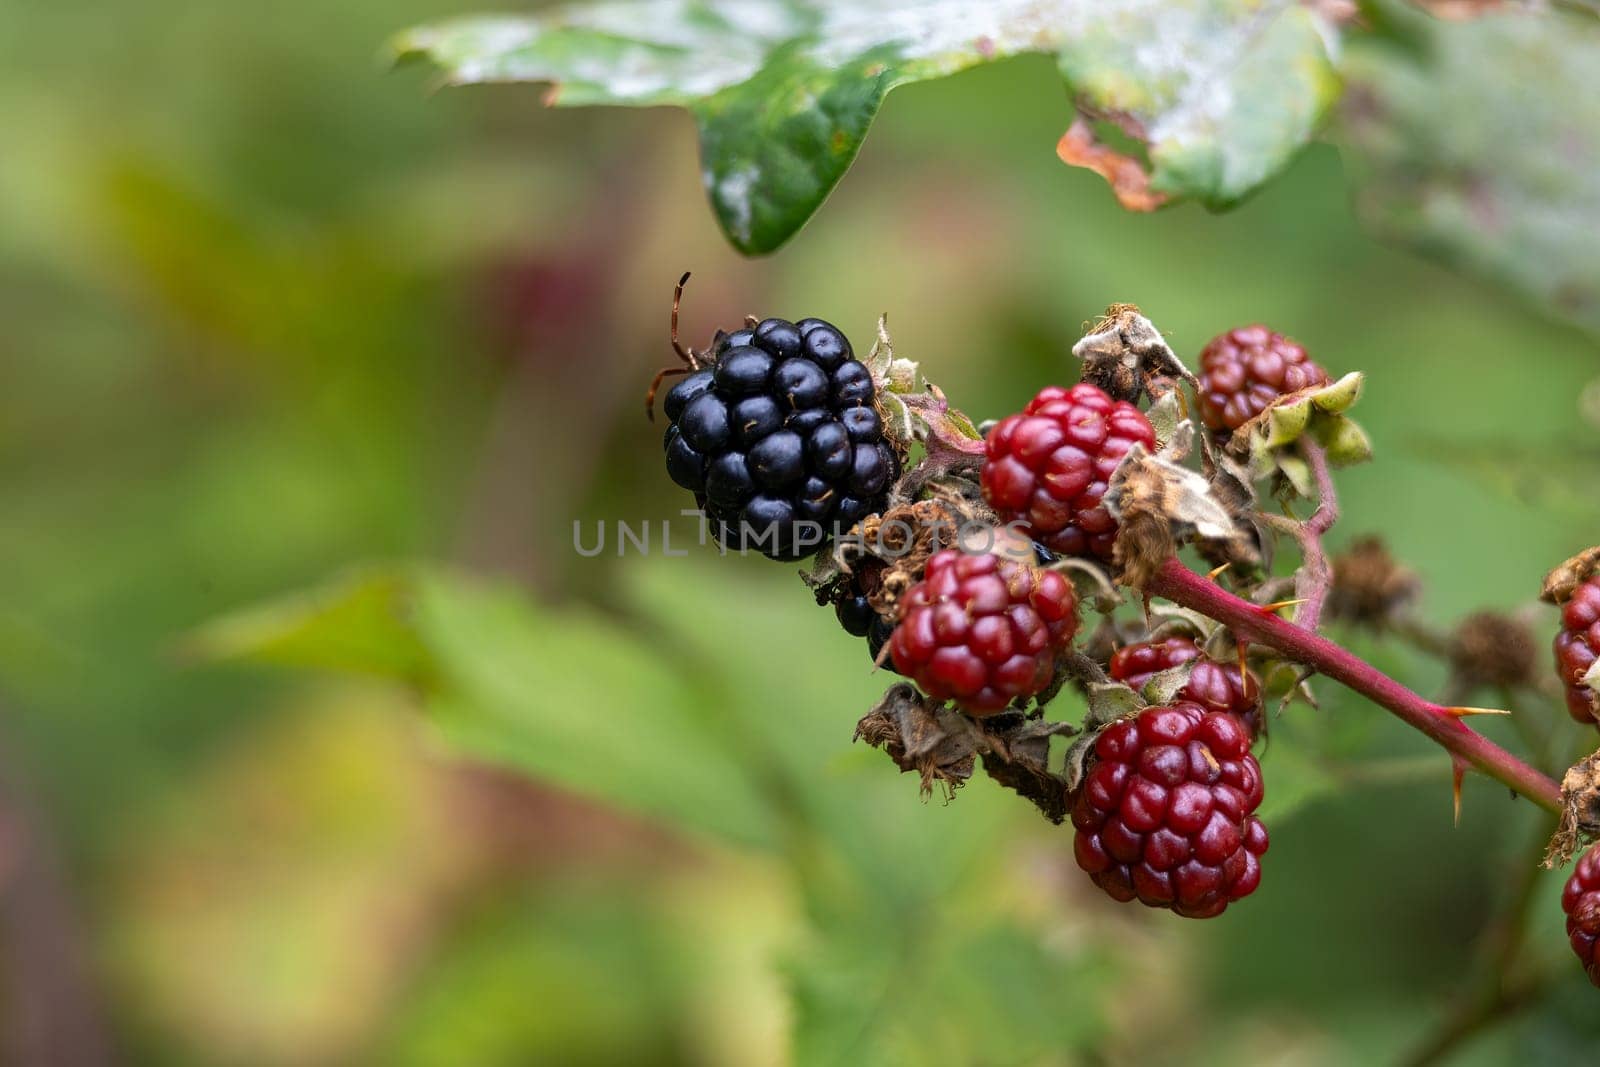 A vibrant image of two blackberry bushes intertwined on one branch, with the lush green leaves of a third bush providing a beautiful backdrop